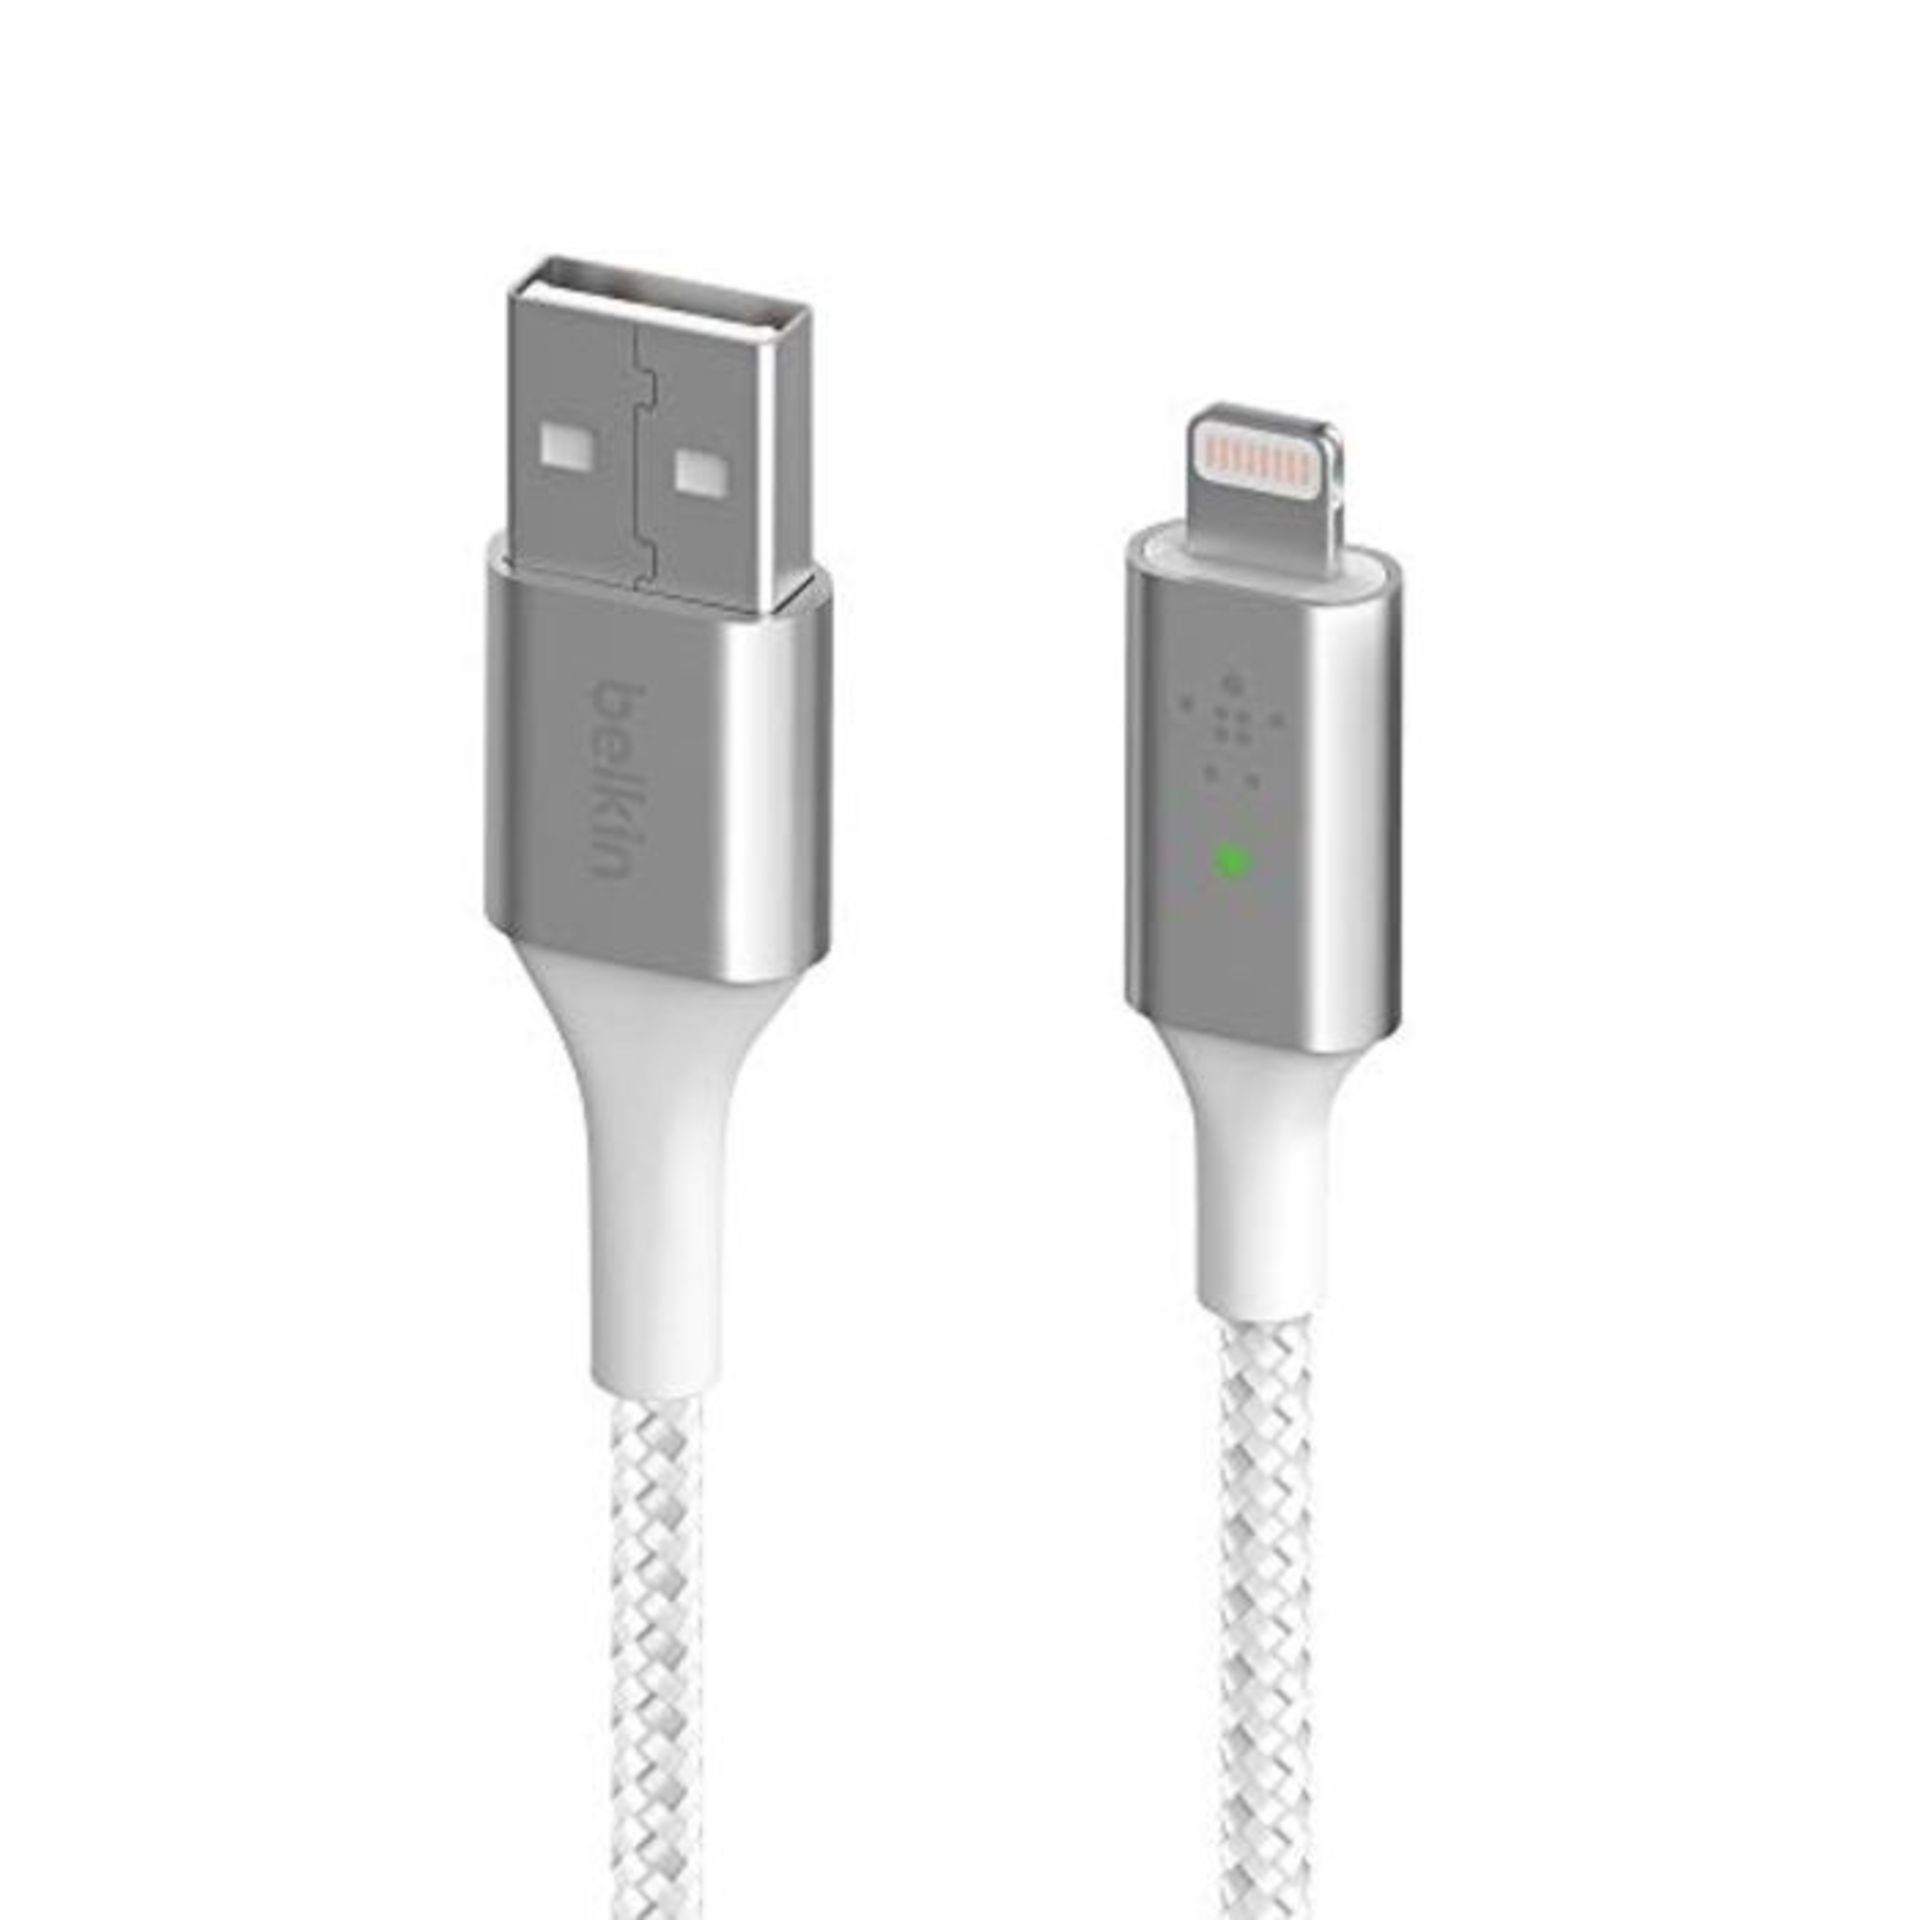 Belkin Smart LED Charging Cable USB to Lightning 4ft/1.2m (See Your Charging Status at